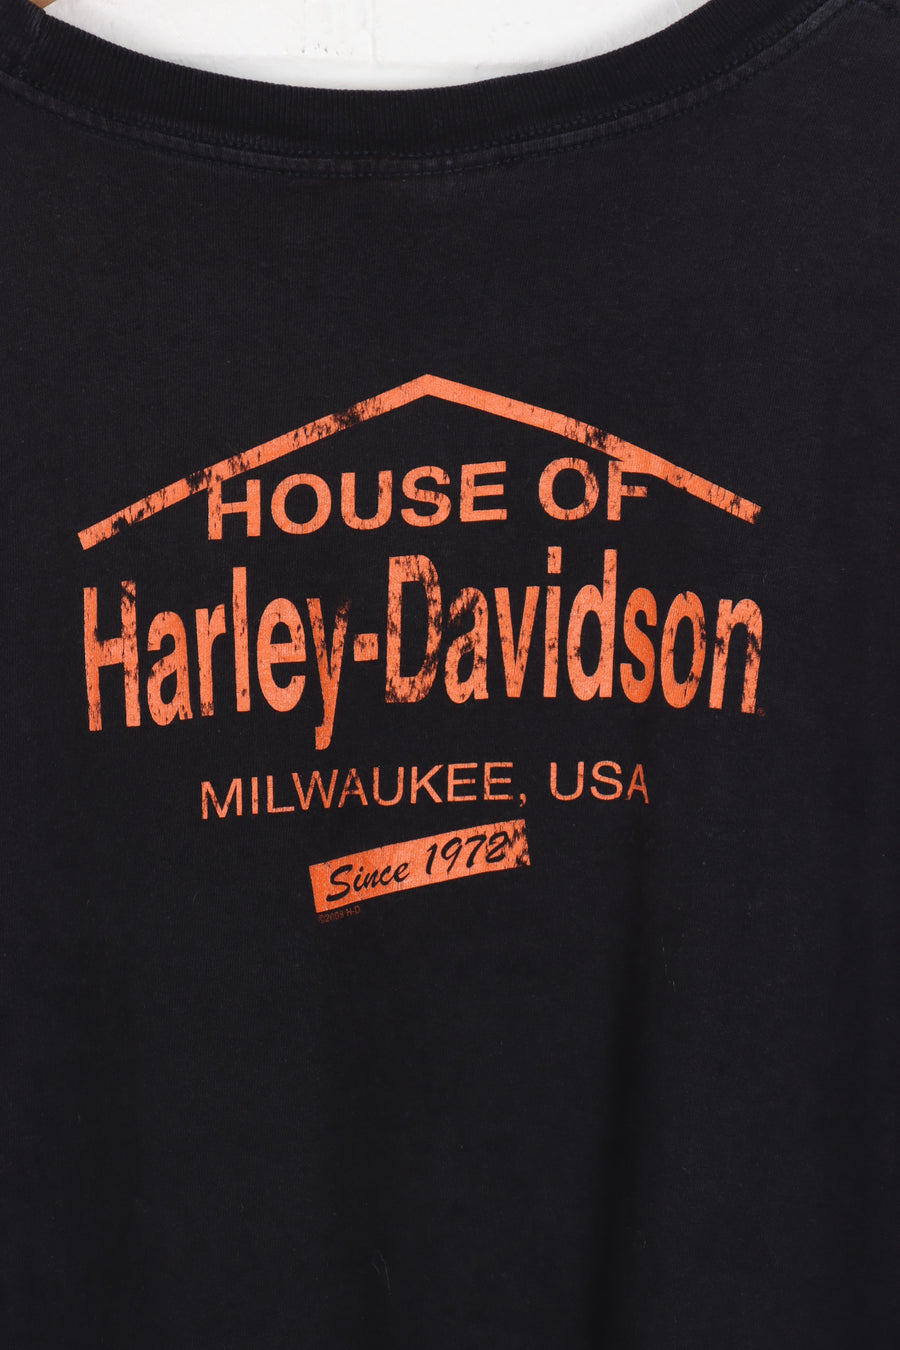 HARLEY DAVIDSON 'This Is Where Home Is' USA Made (XXL)